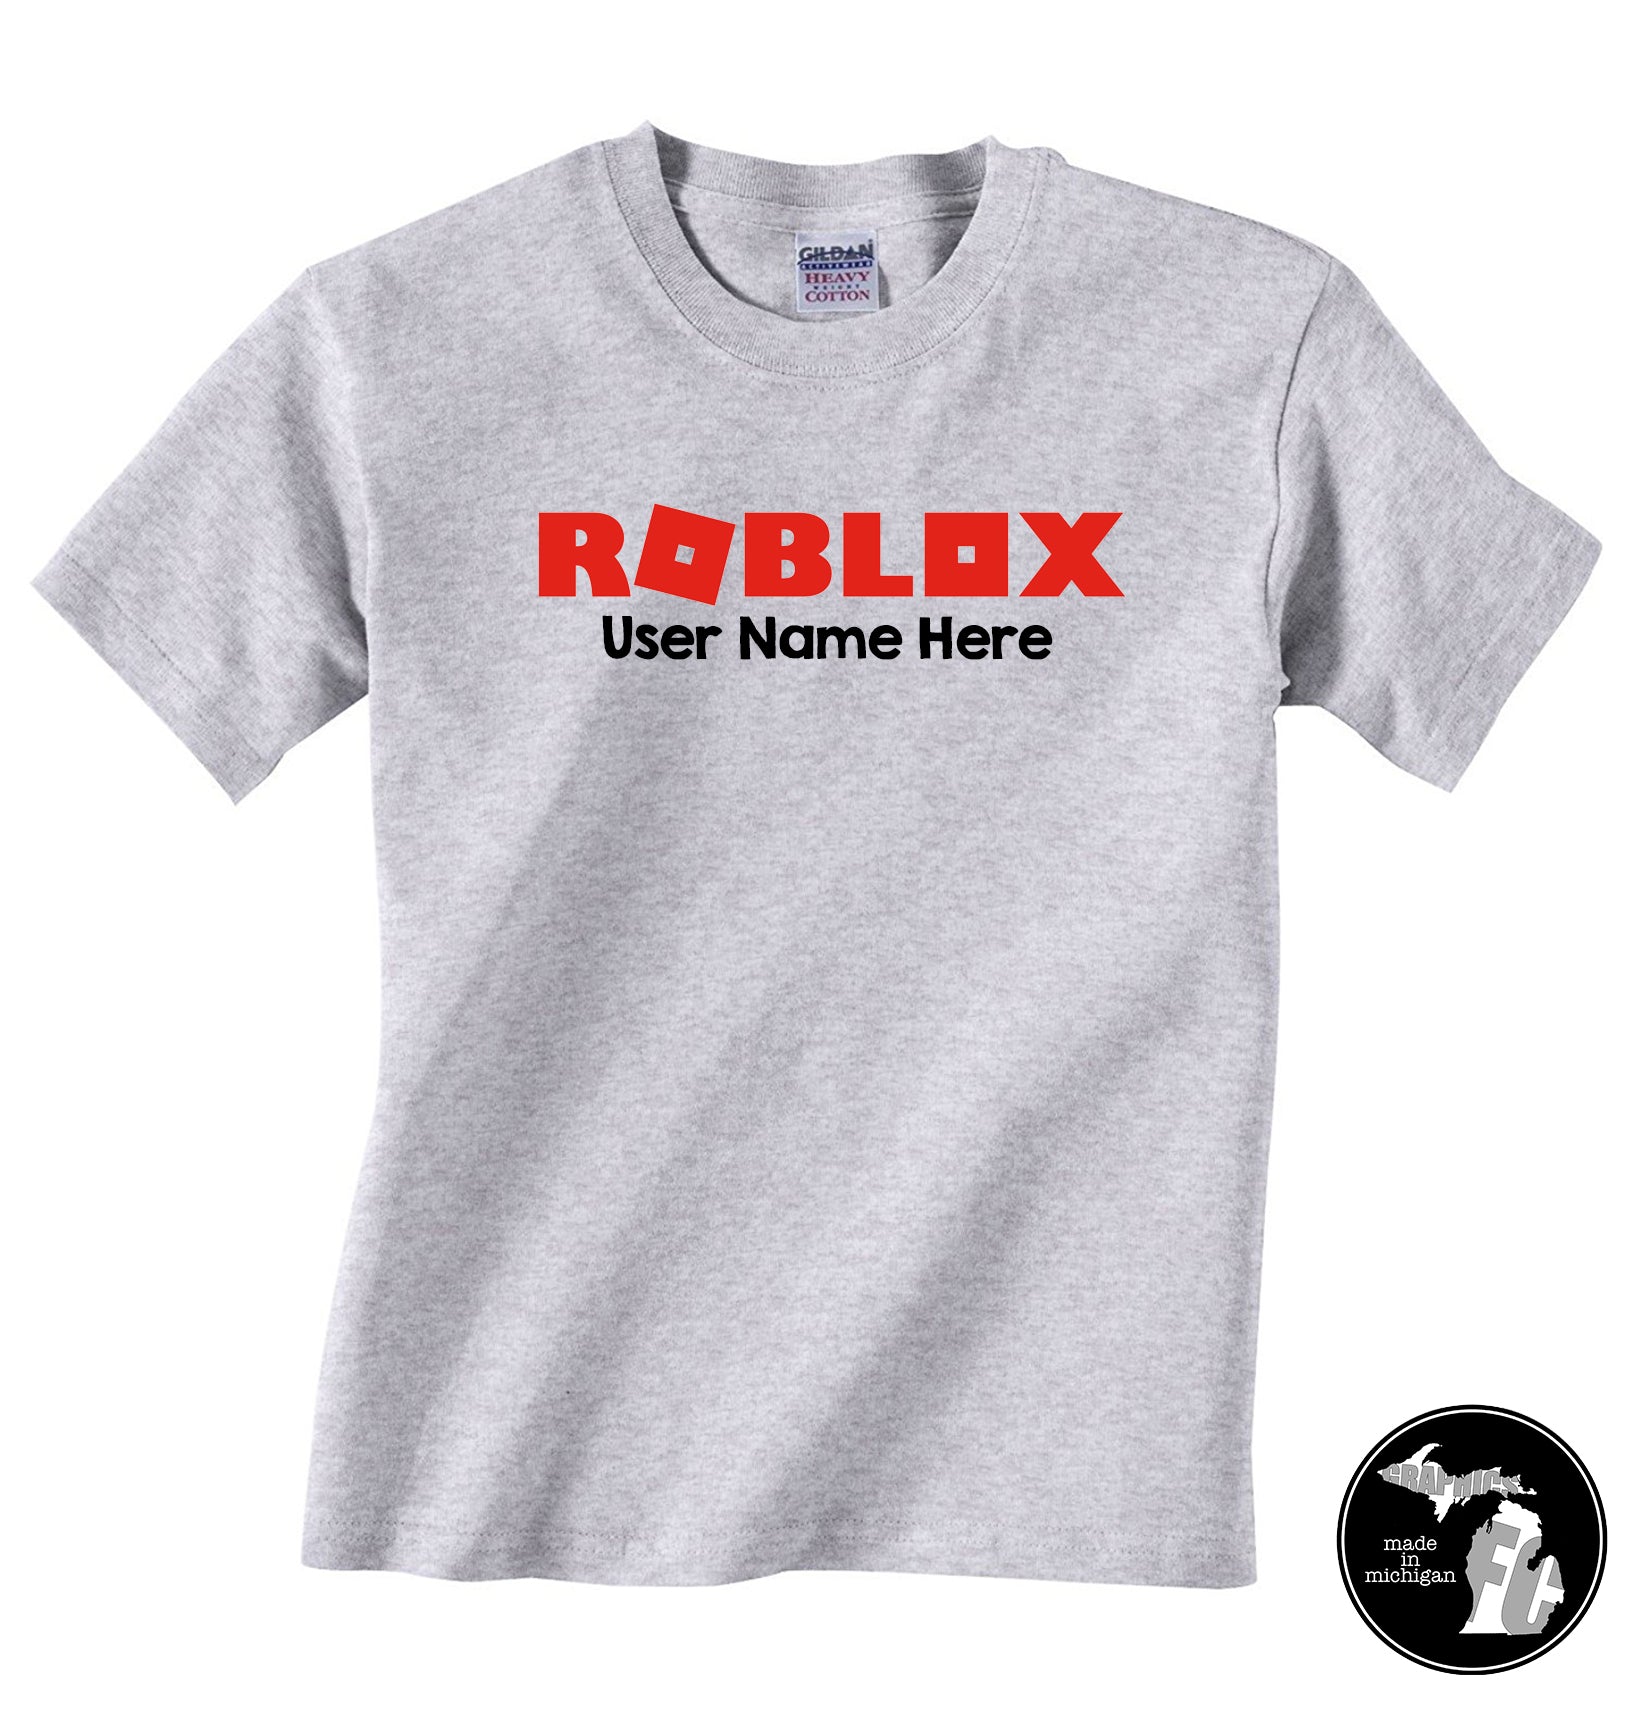 Roblox Clothing Store Names